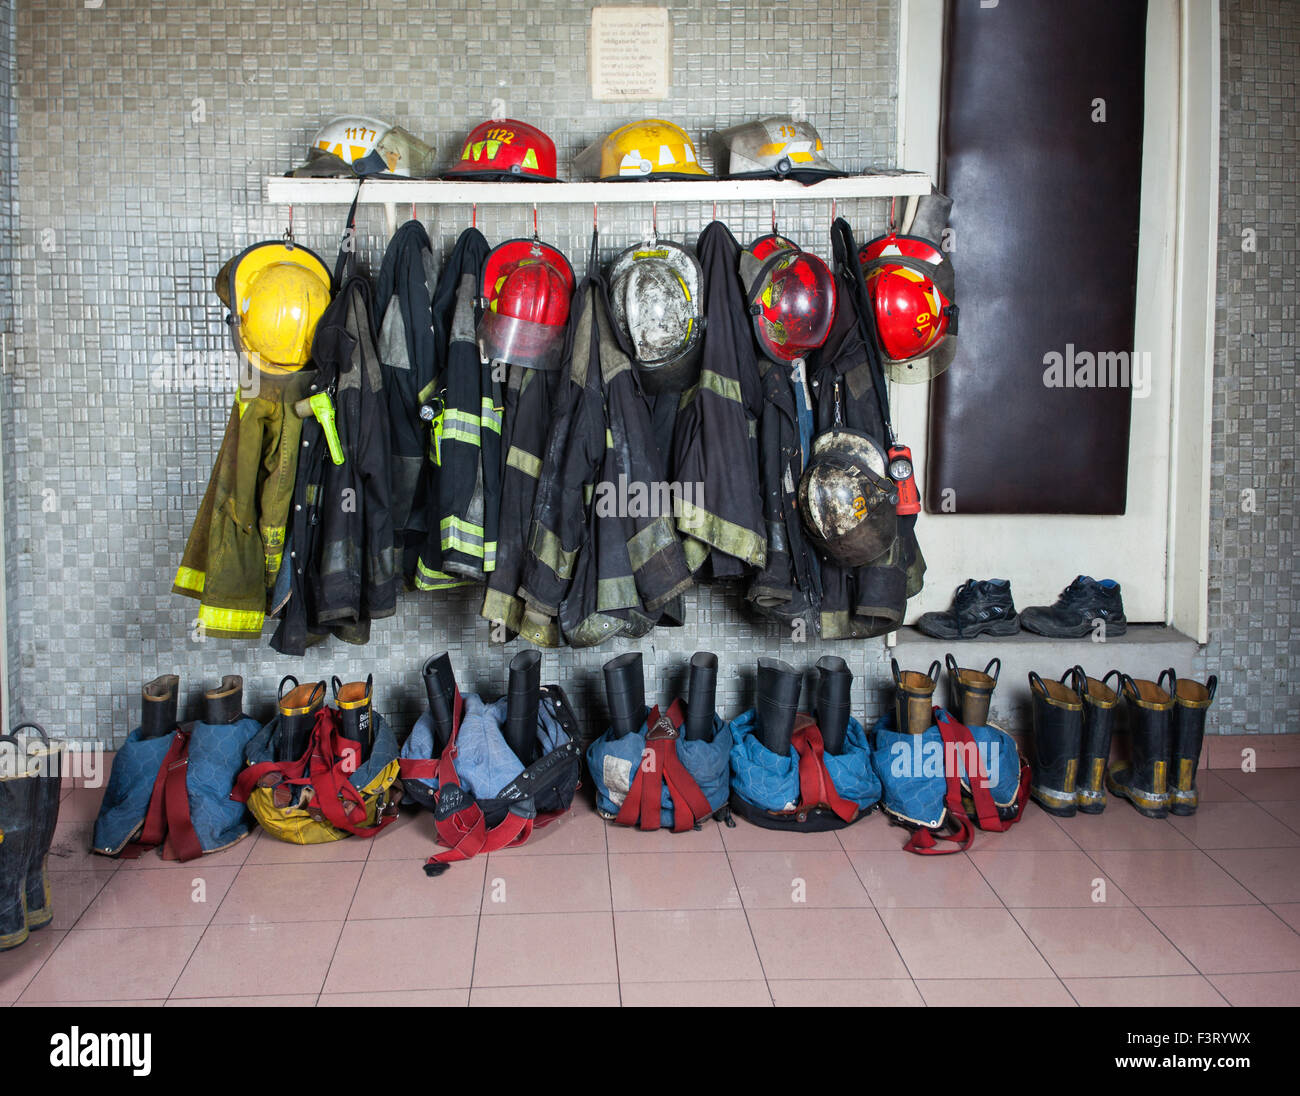 Firefighter Suits Arranged At Fire Station Stock Photo